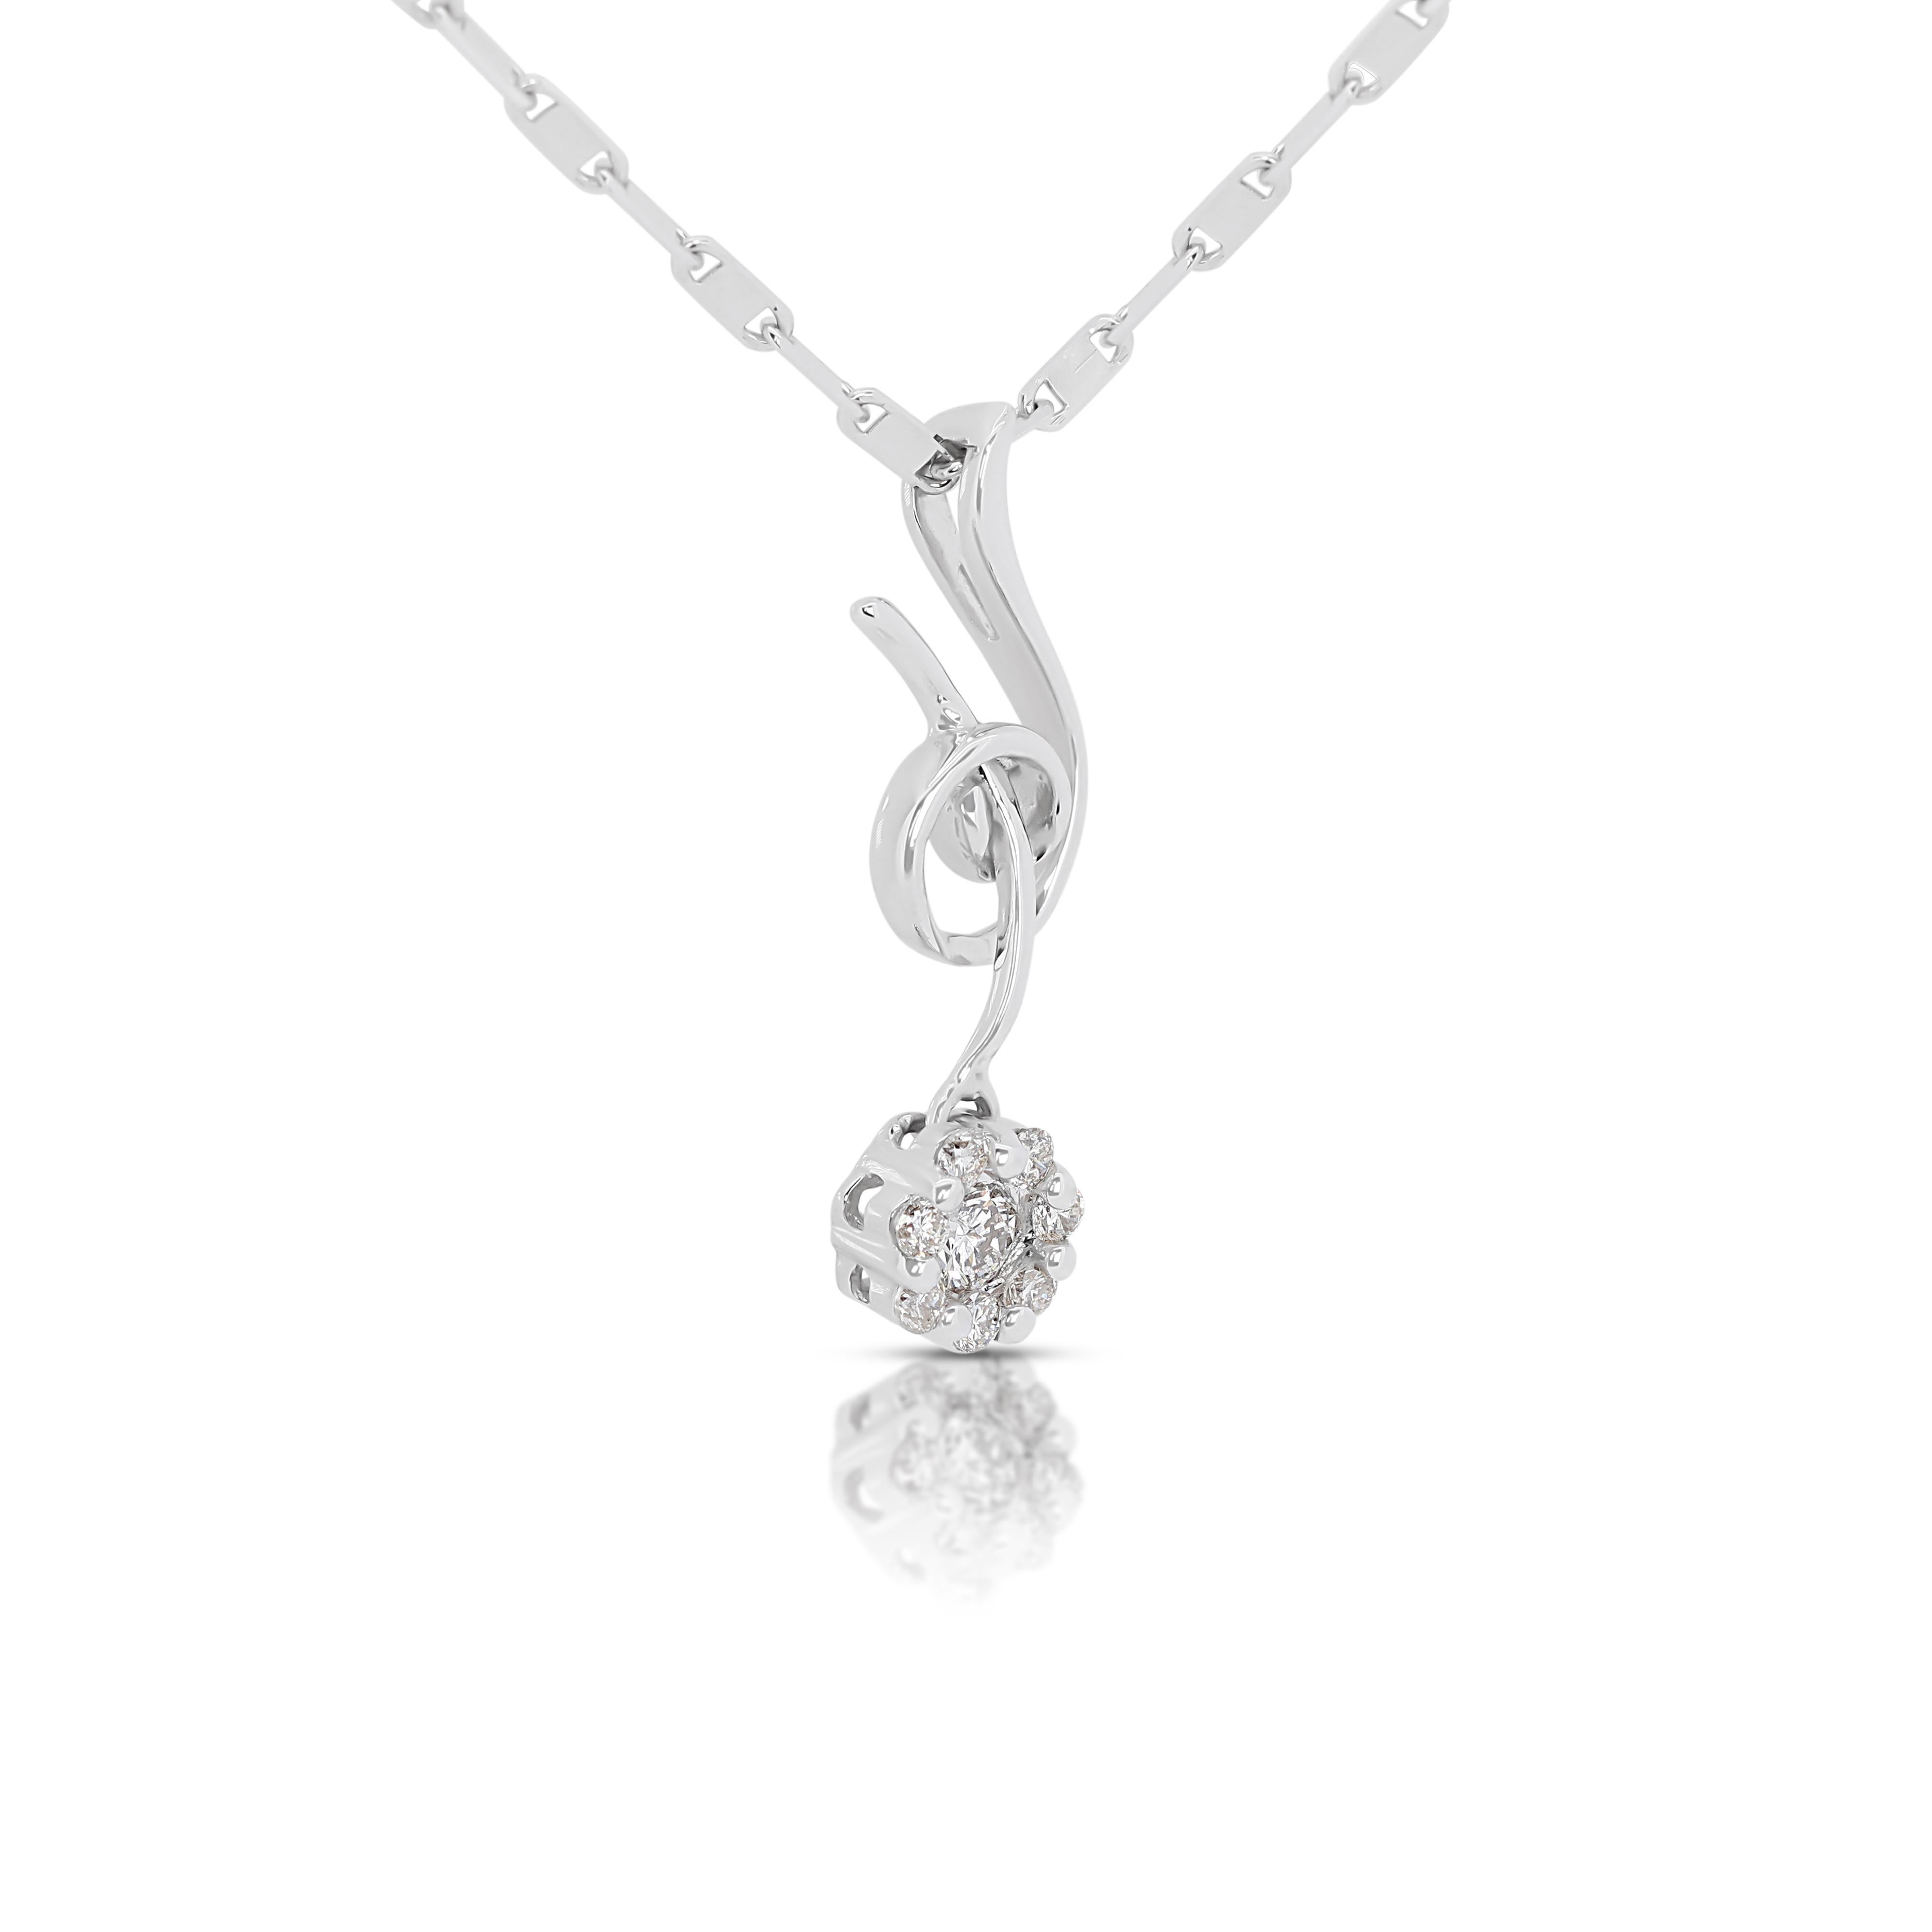 Stunning 0.16ct Diamonds Necklace in 18K White Gold - (Chain Included) In Excellent Condition For Sale In רמת גן, IL